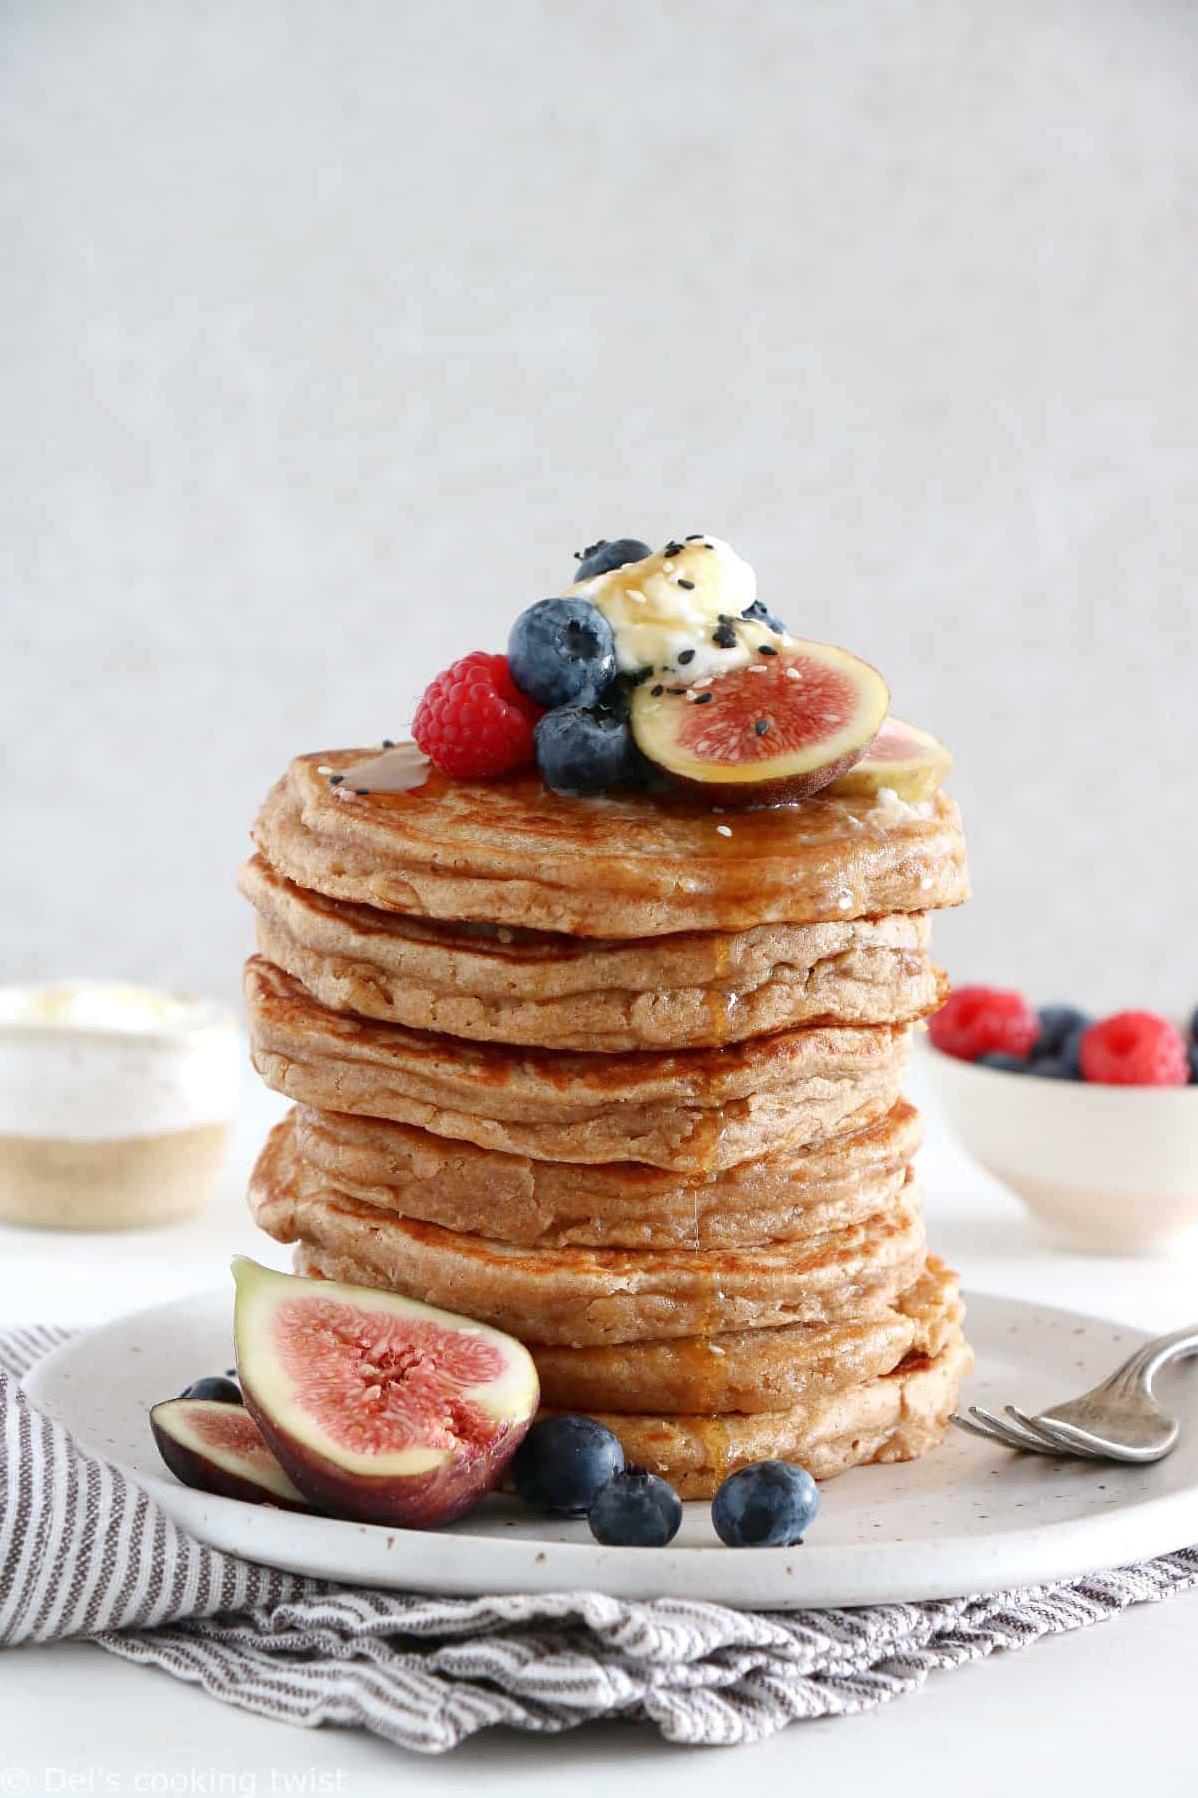  Nothing beats a stack of homemade pancakes.